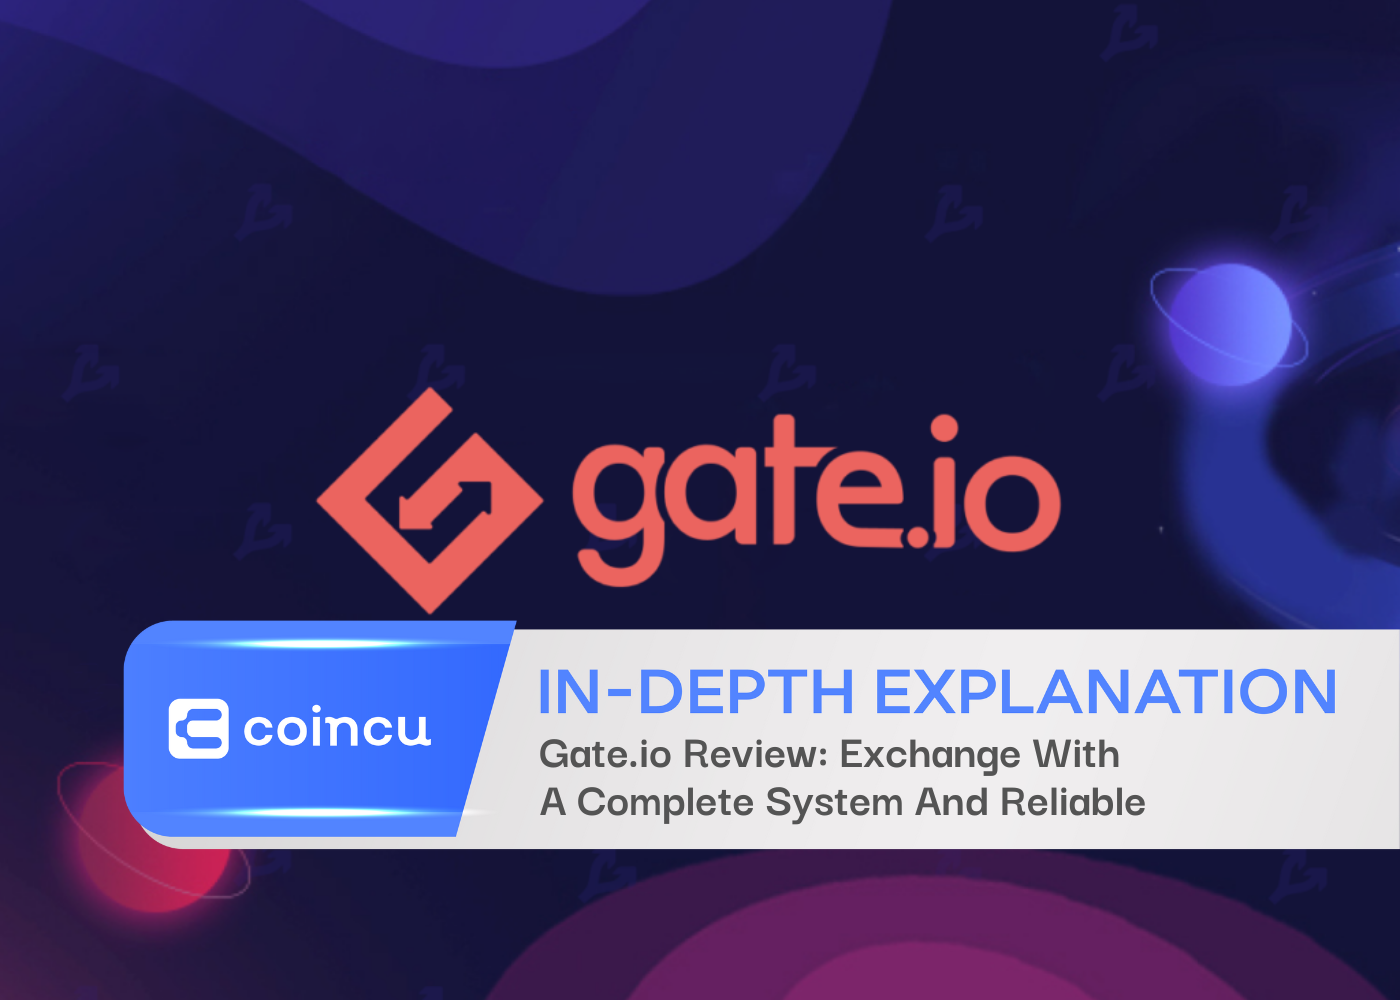 Gate.io Review: Exchange With A Complete System And Reliable